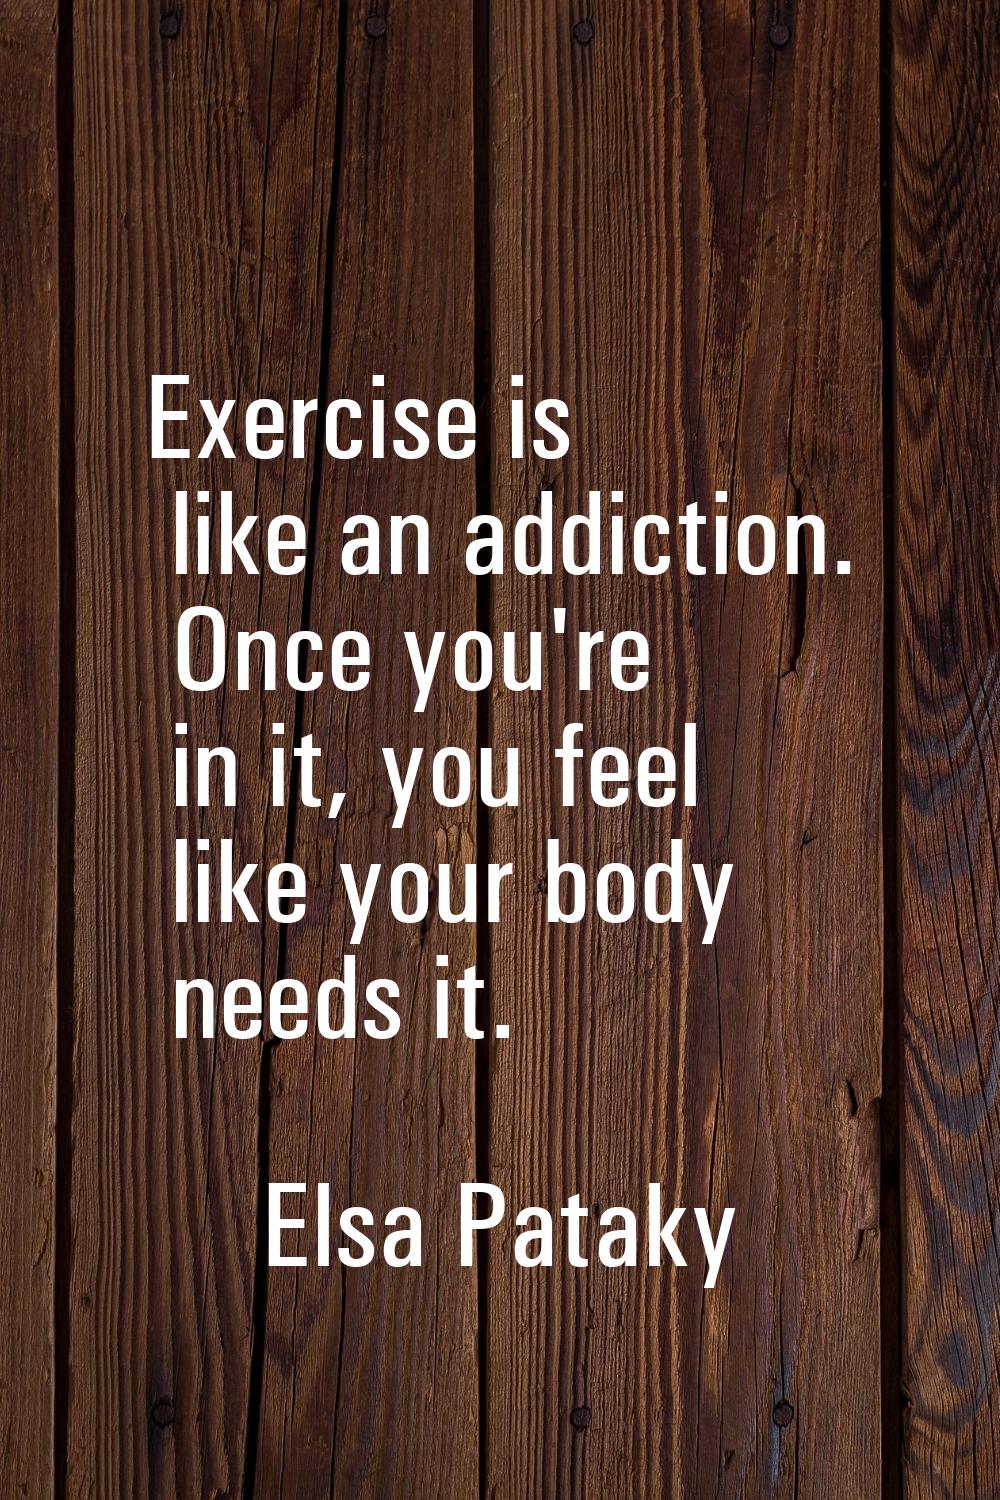 Exercise is like an addiction. Once you're in it, you feel like your body needs it.